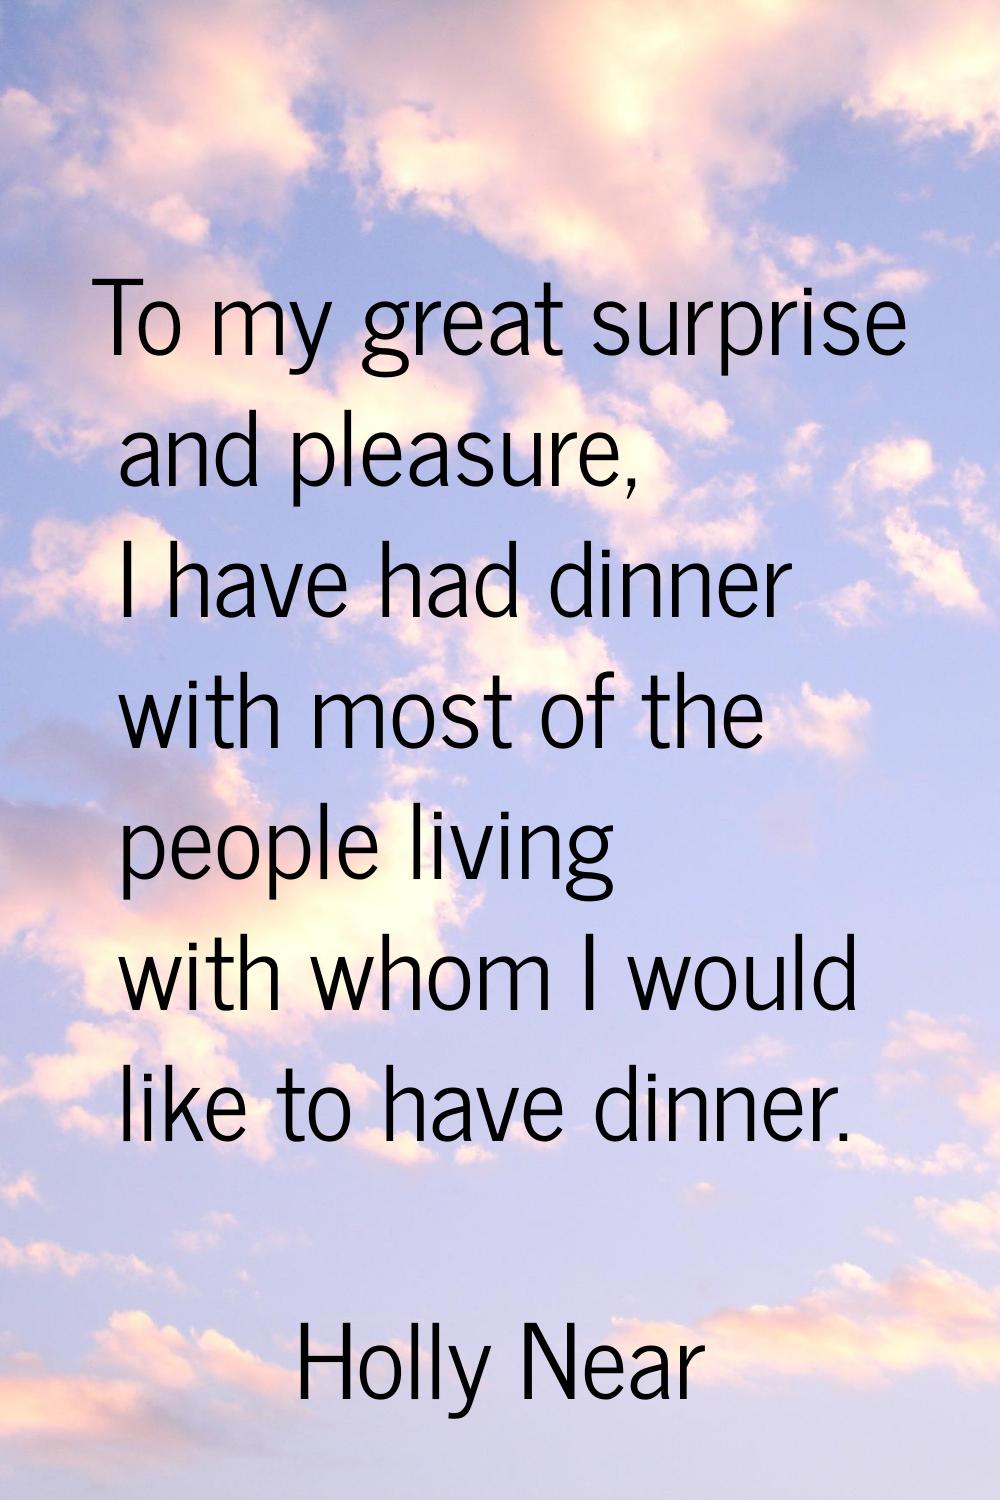 To my great surprise and pleasure, I have had dinner with most of the people living with whom I wou